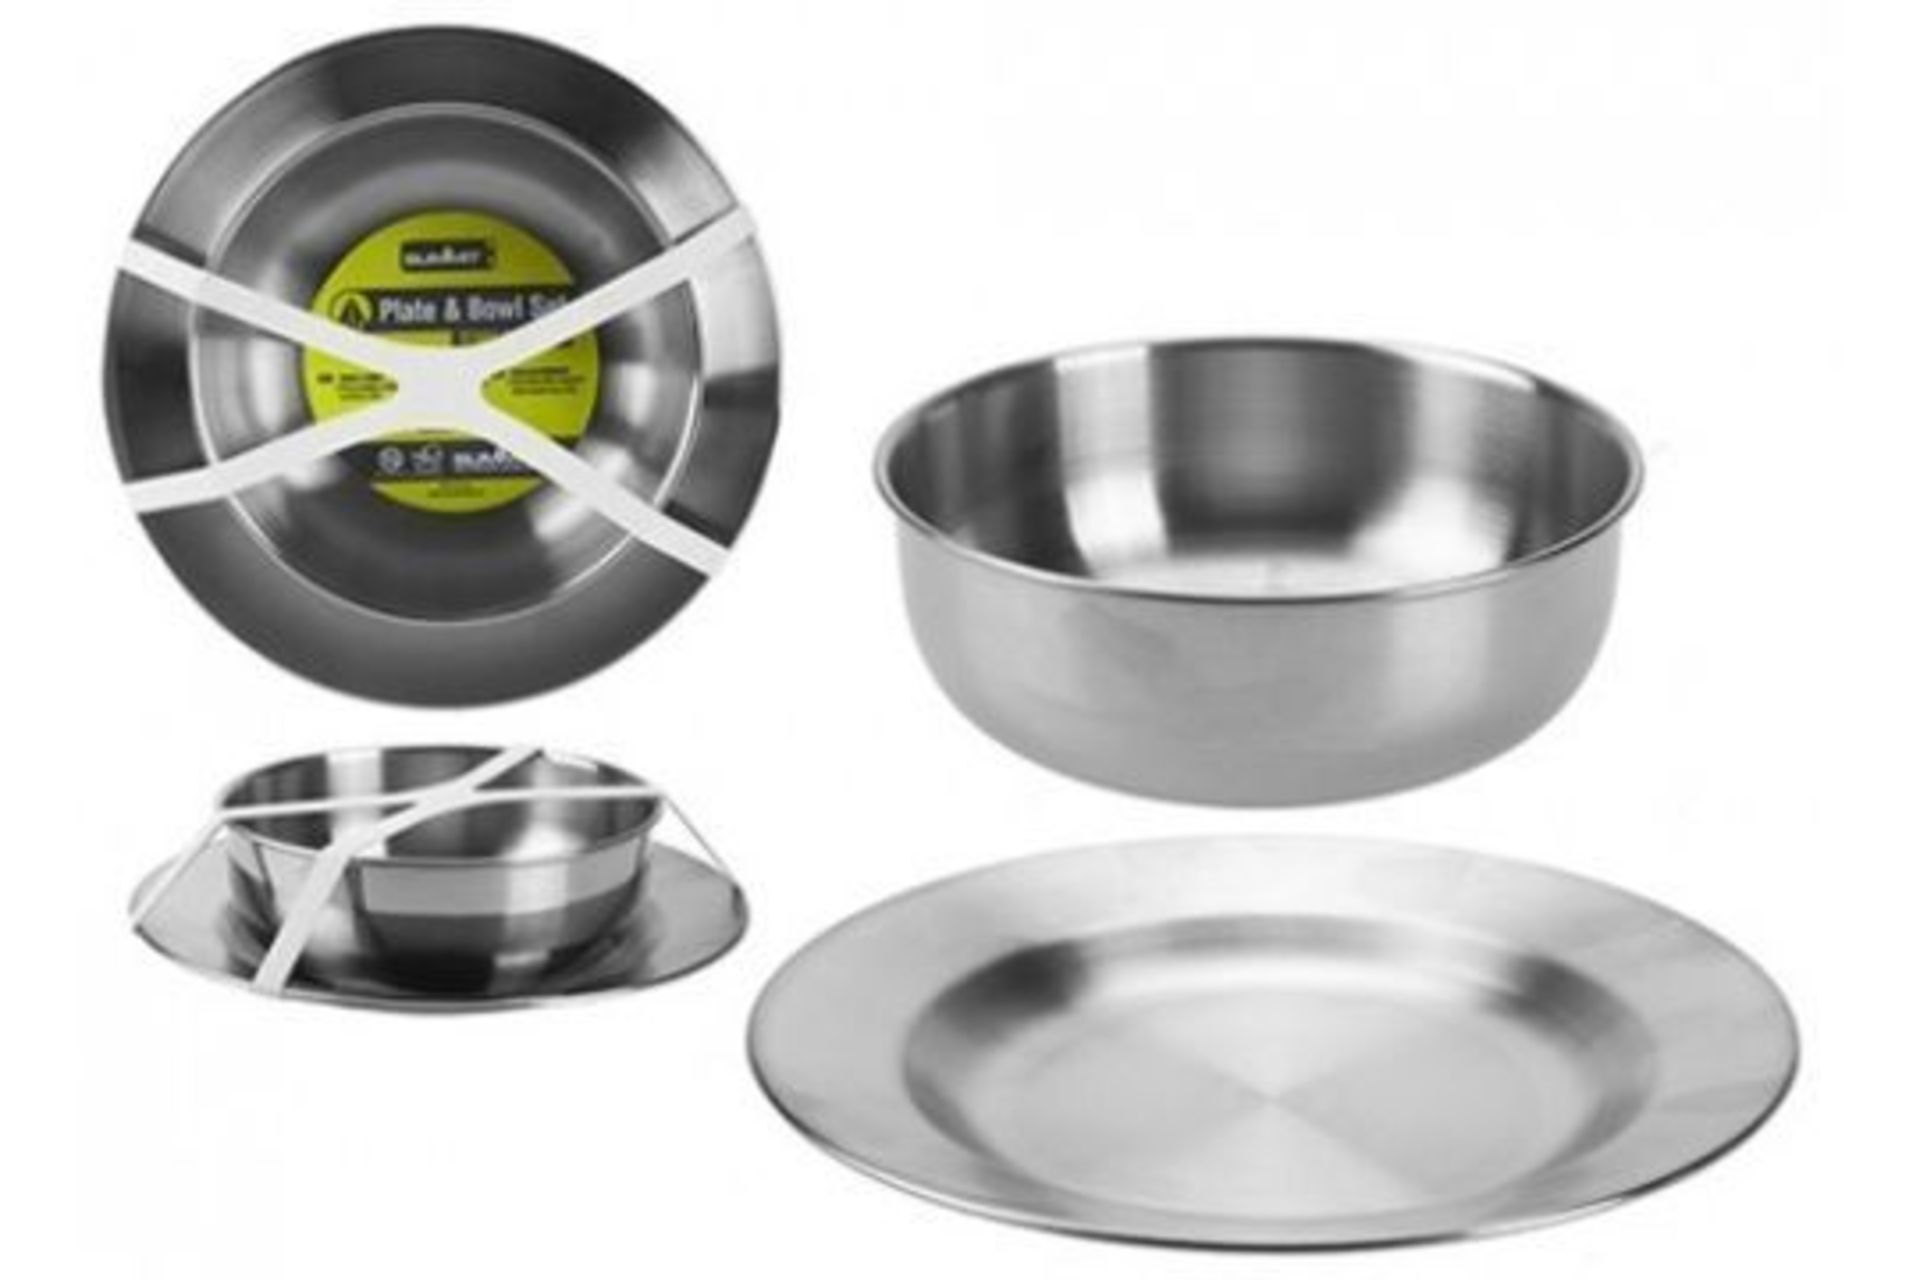 New Summit Stainless Steel Plate & Bowl Set - 14.5 bowl/20cm plate